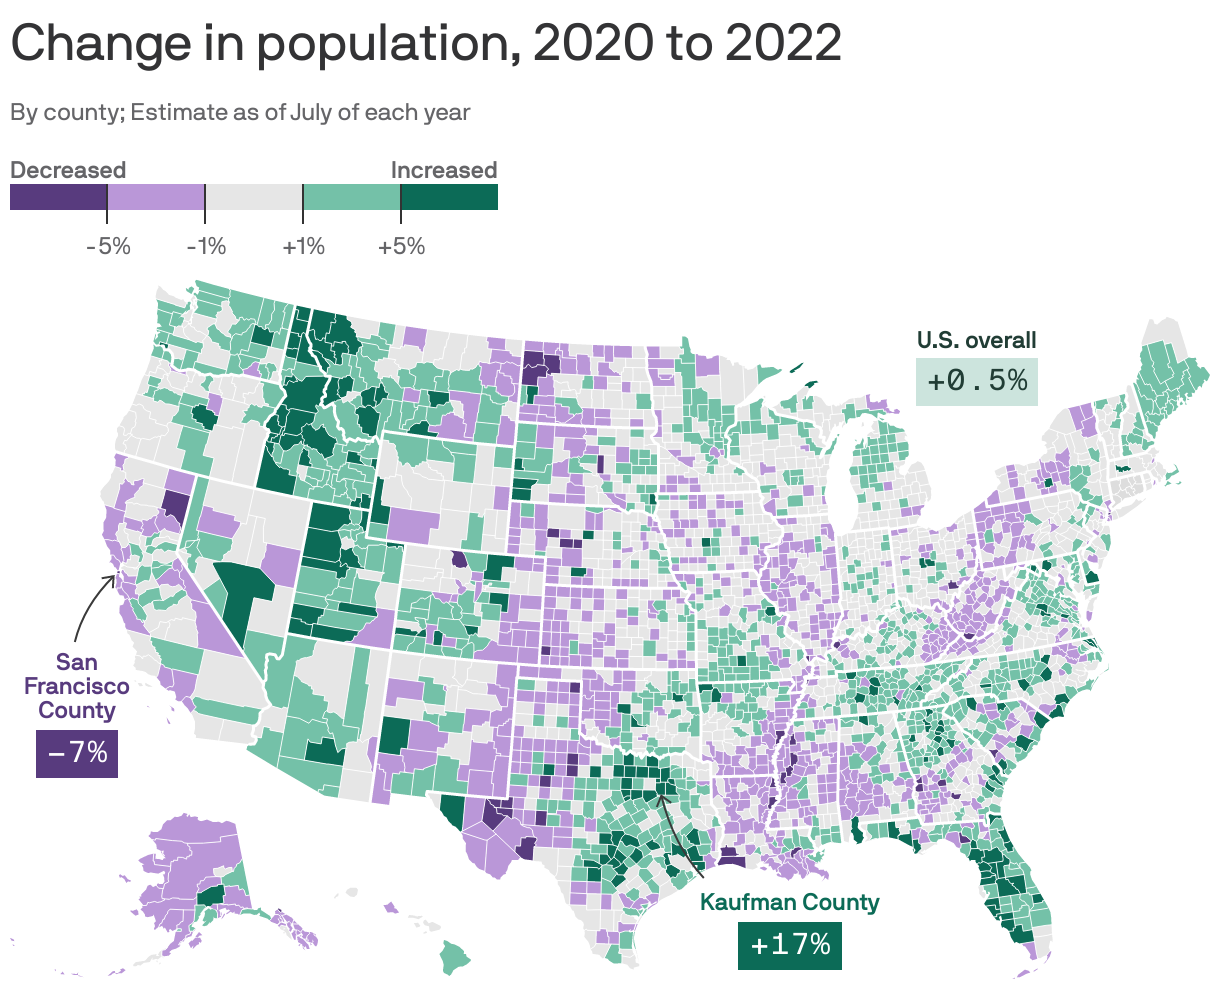 Change in population, 2020 to 2022